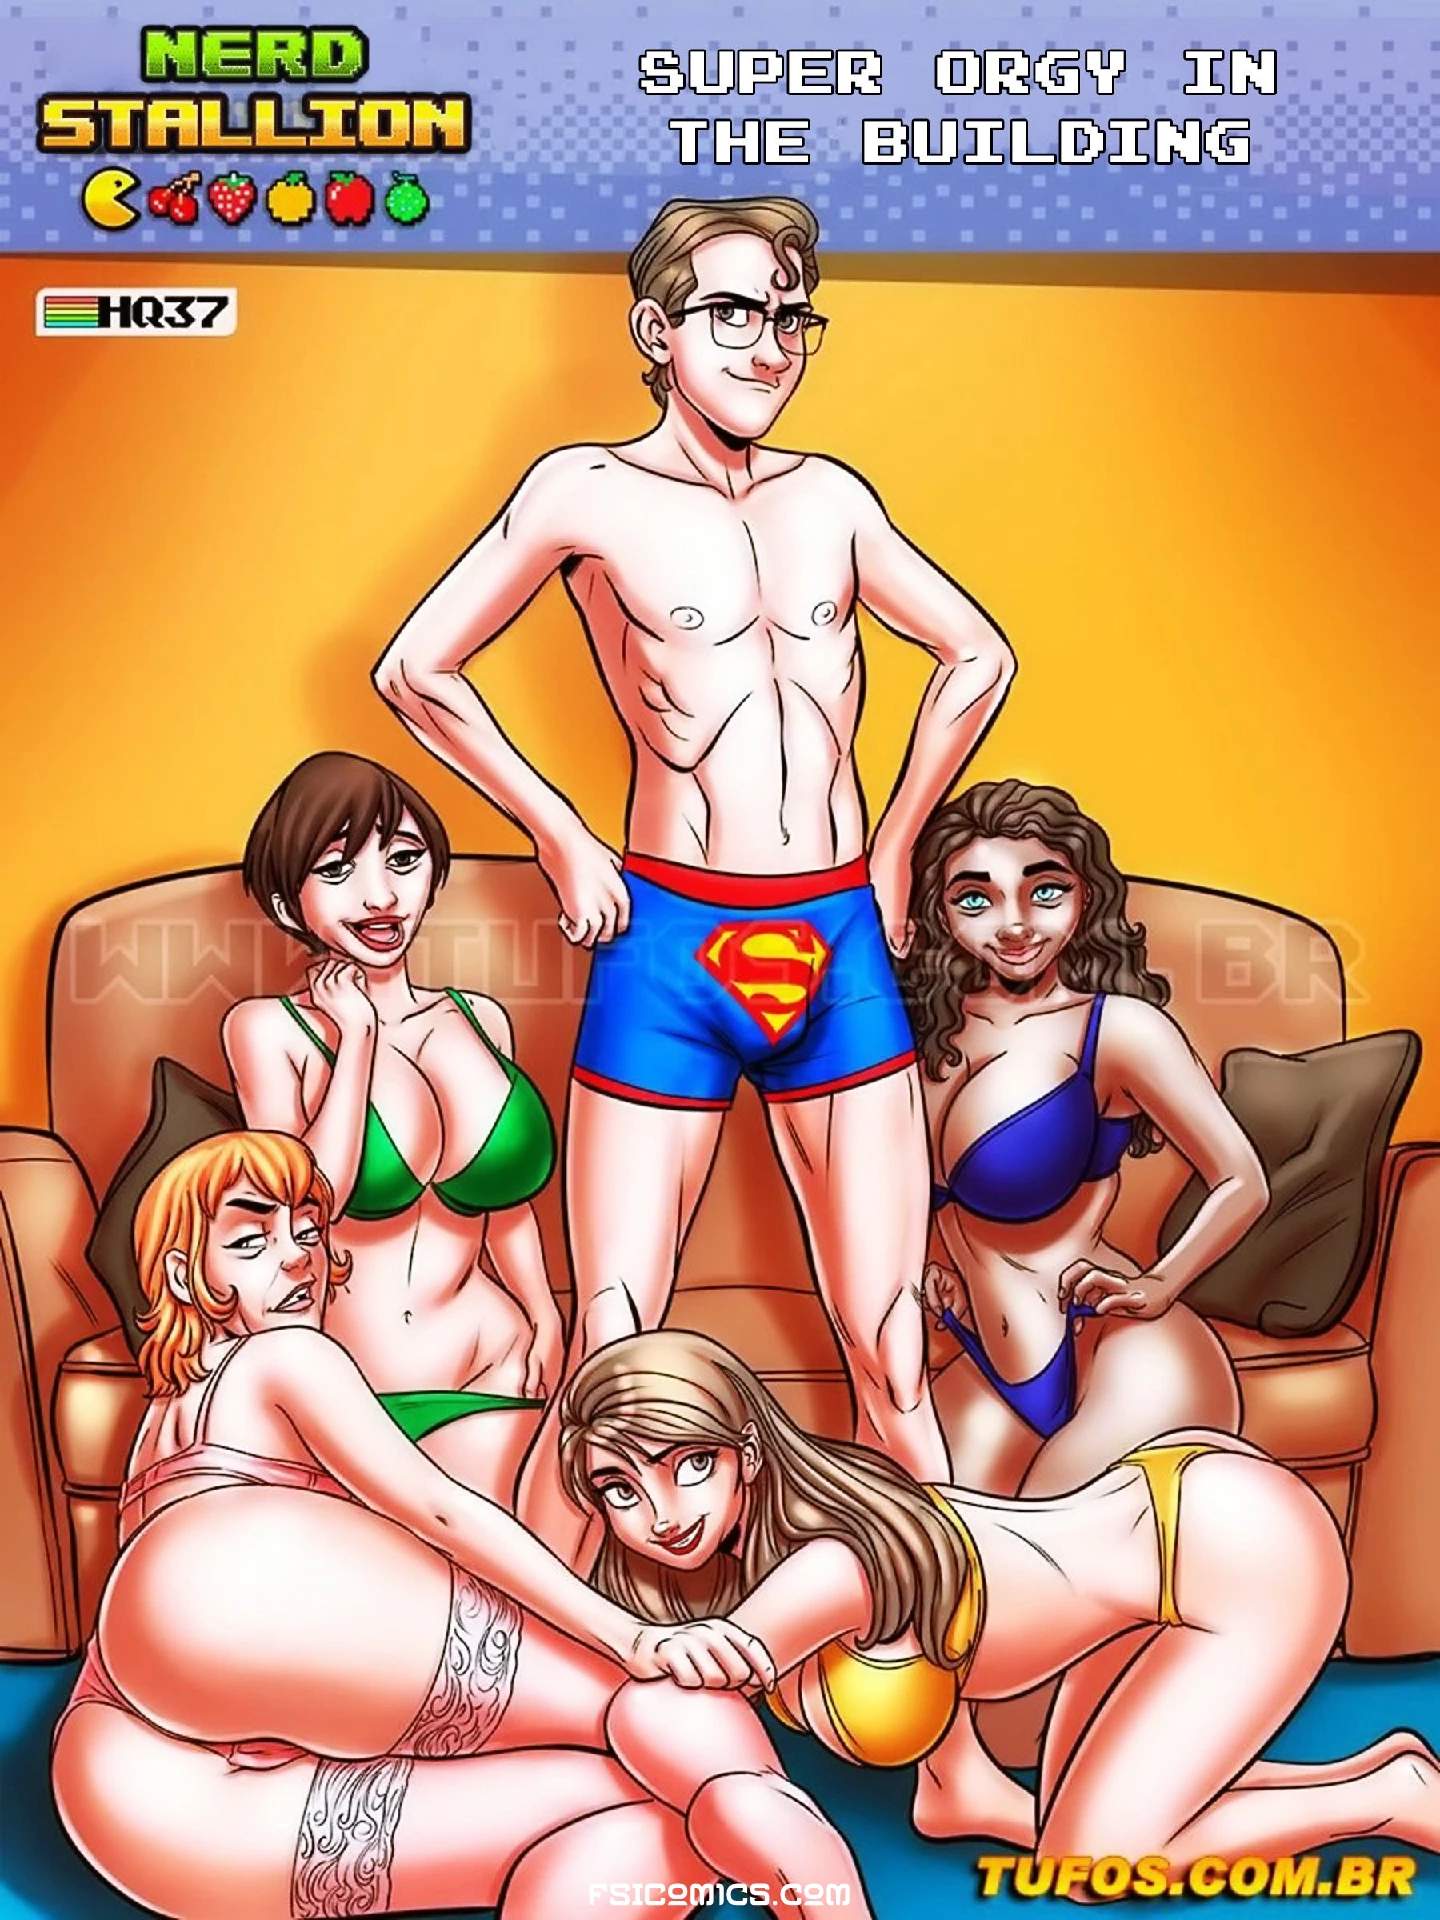 The Nerd Stallion Chapter 37 – Super Orgy In The Building – Wc Tf - 73 - Fsicomics